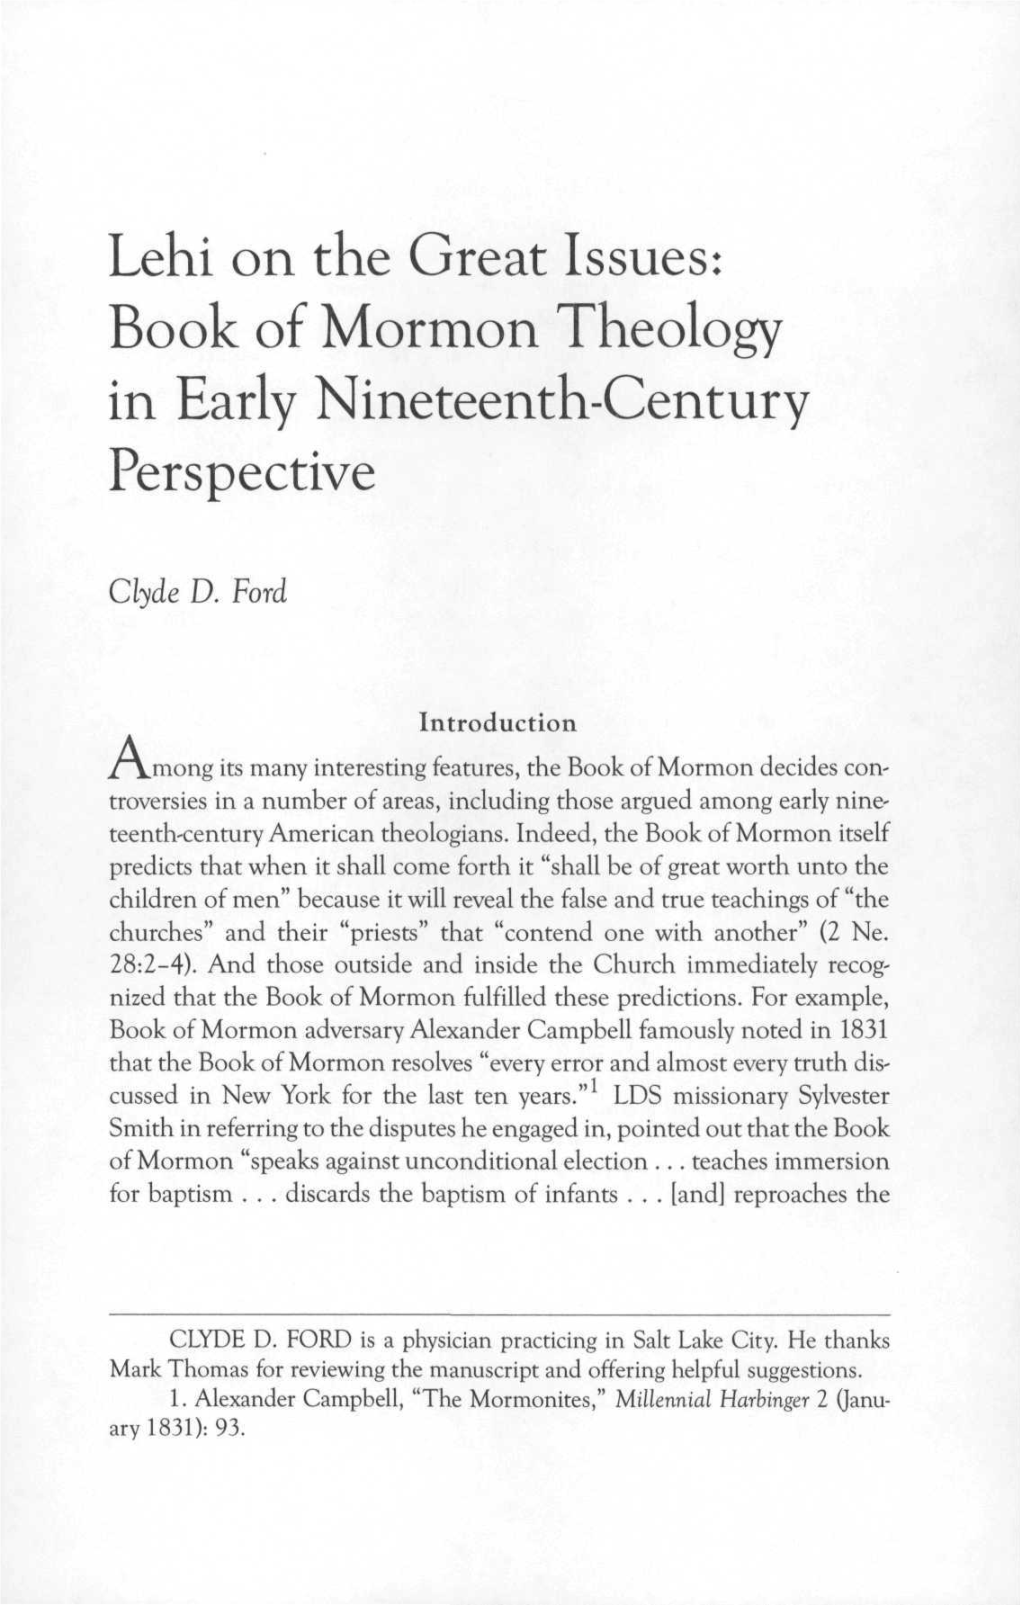 Book of Mormon Theology in Early Nineteenth-Century Perspective